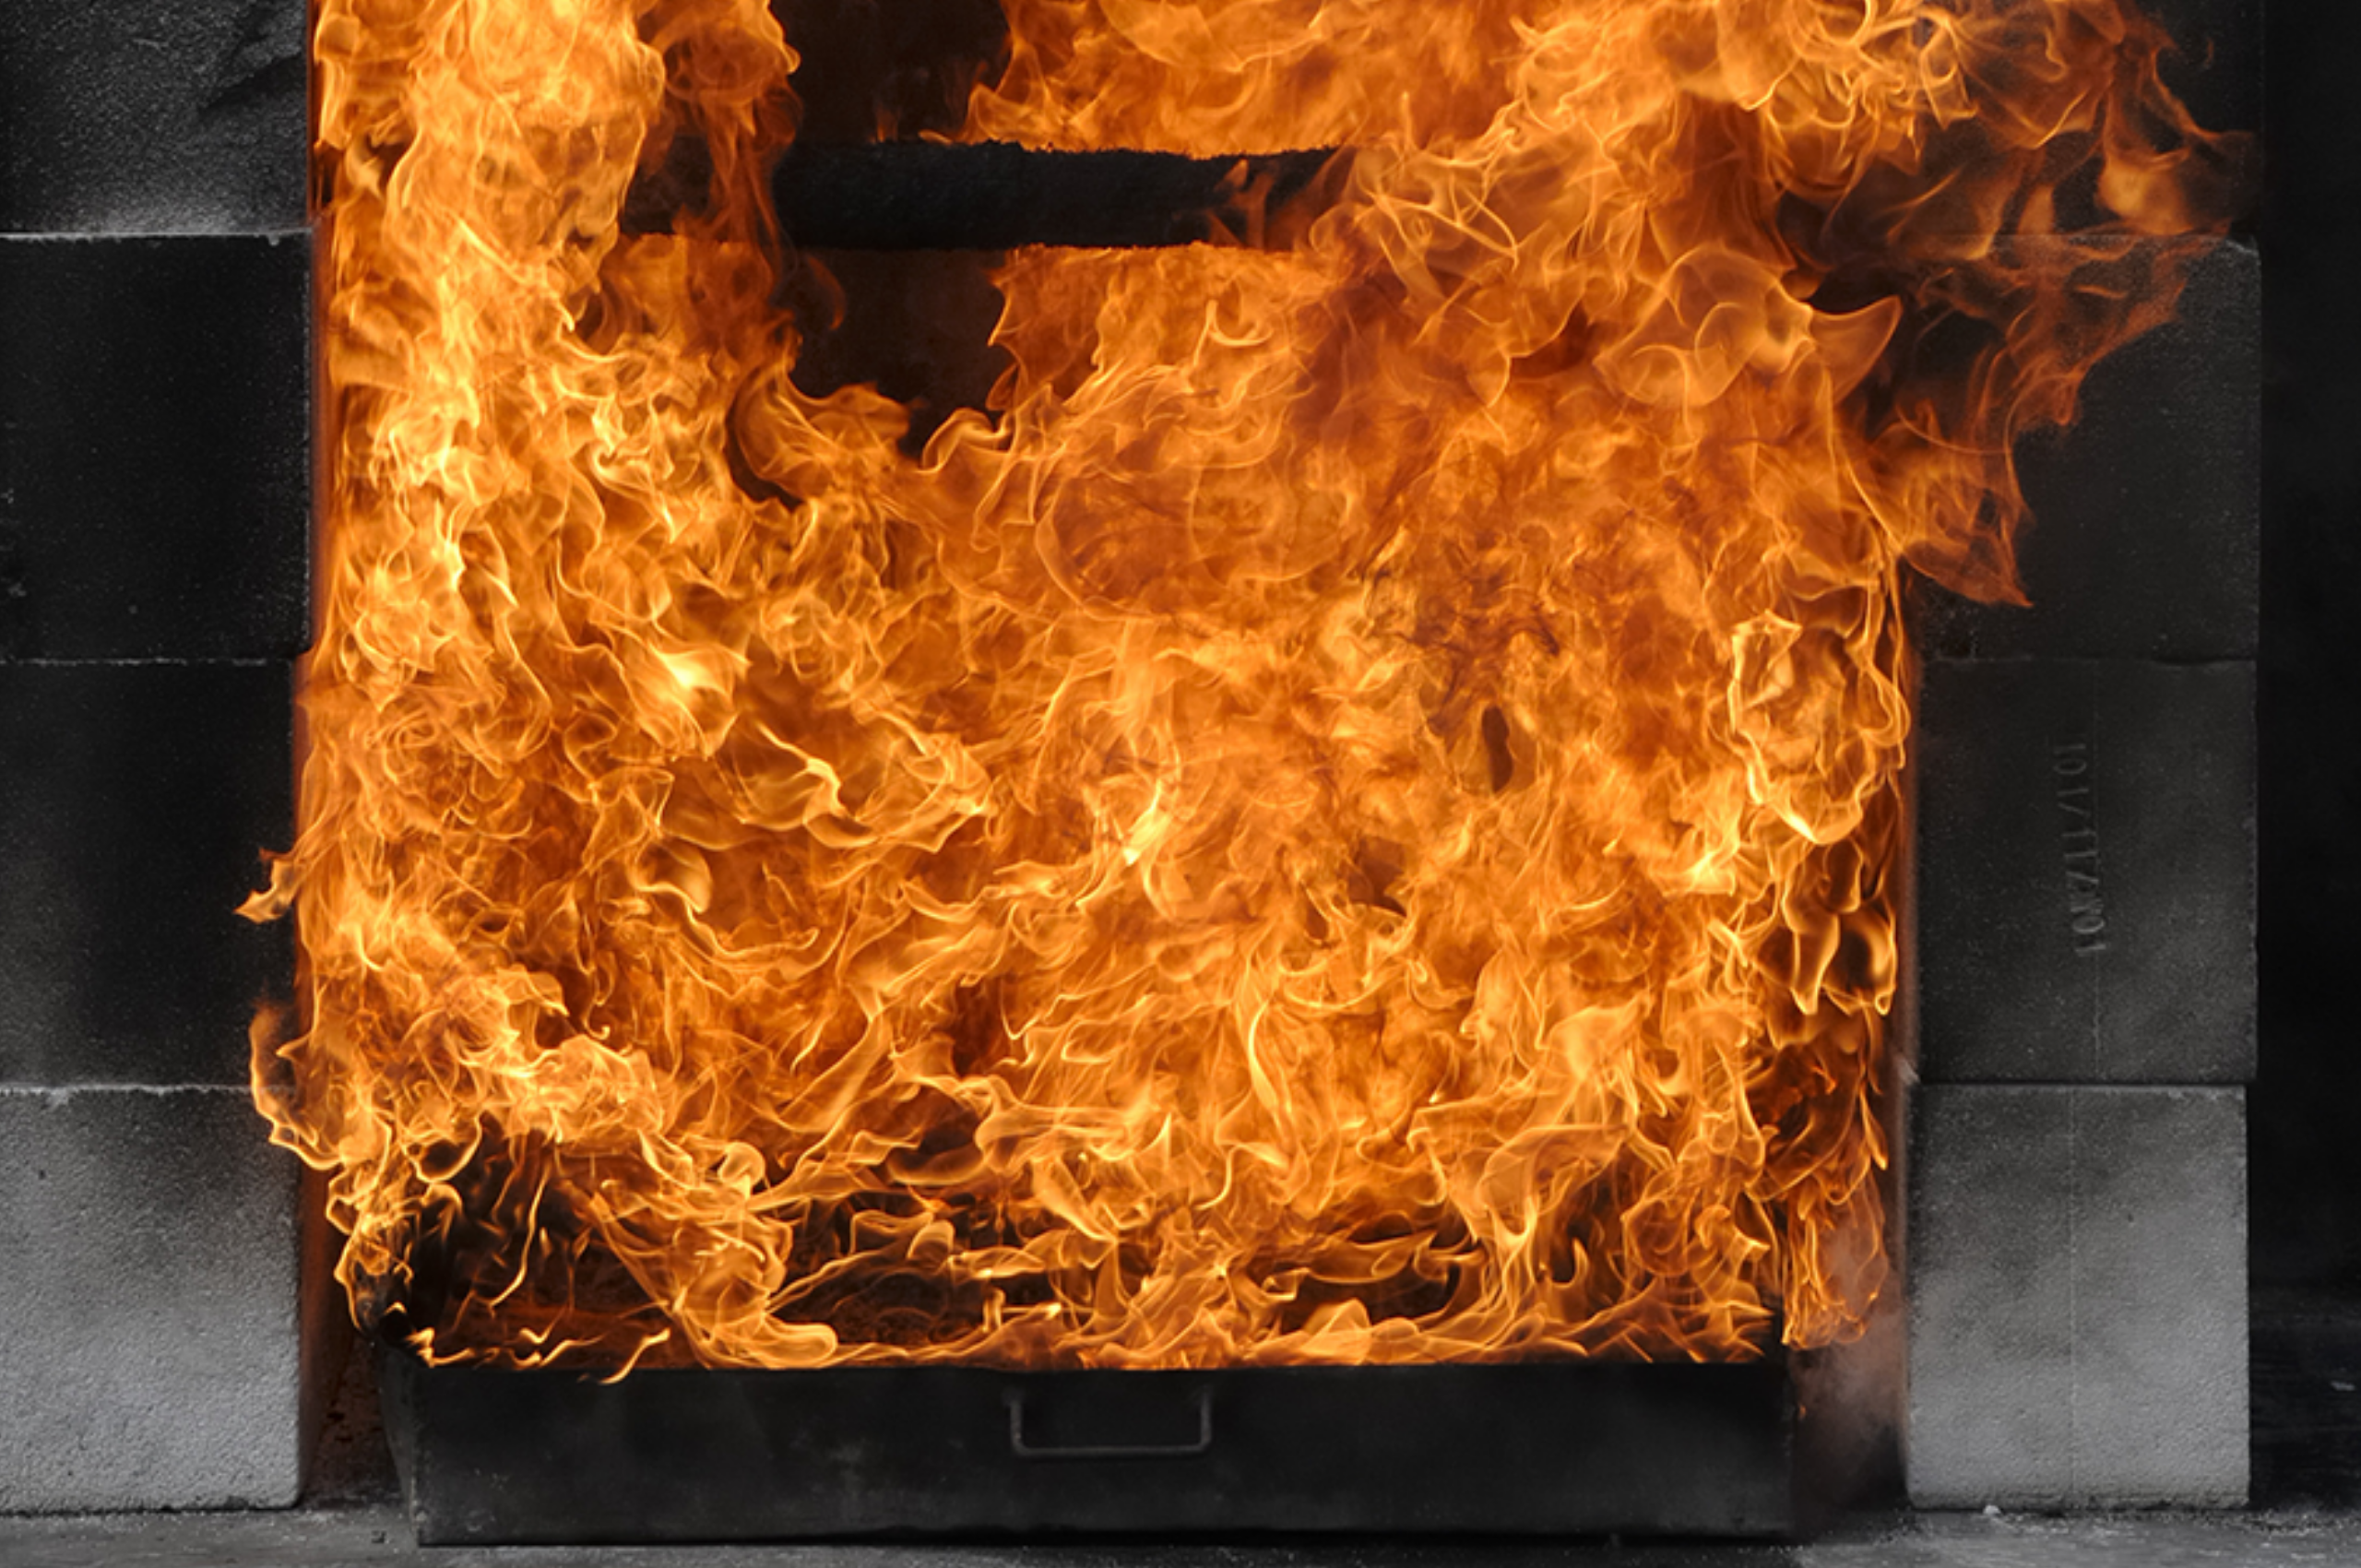 What Is Bs8414, Br135 and EN 13501-1 Fire Testing?